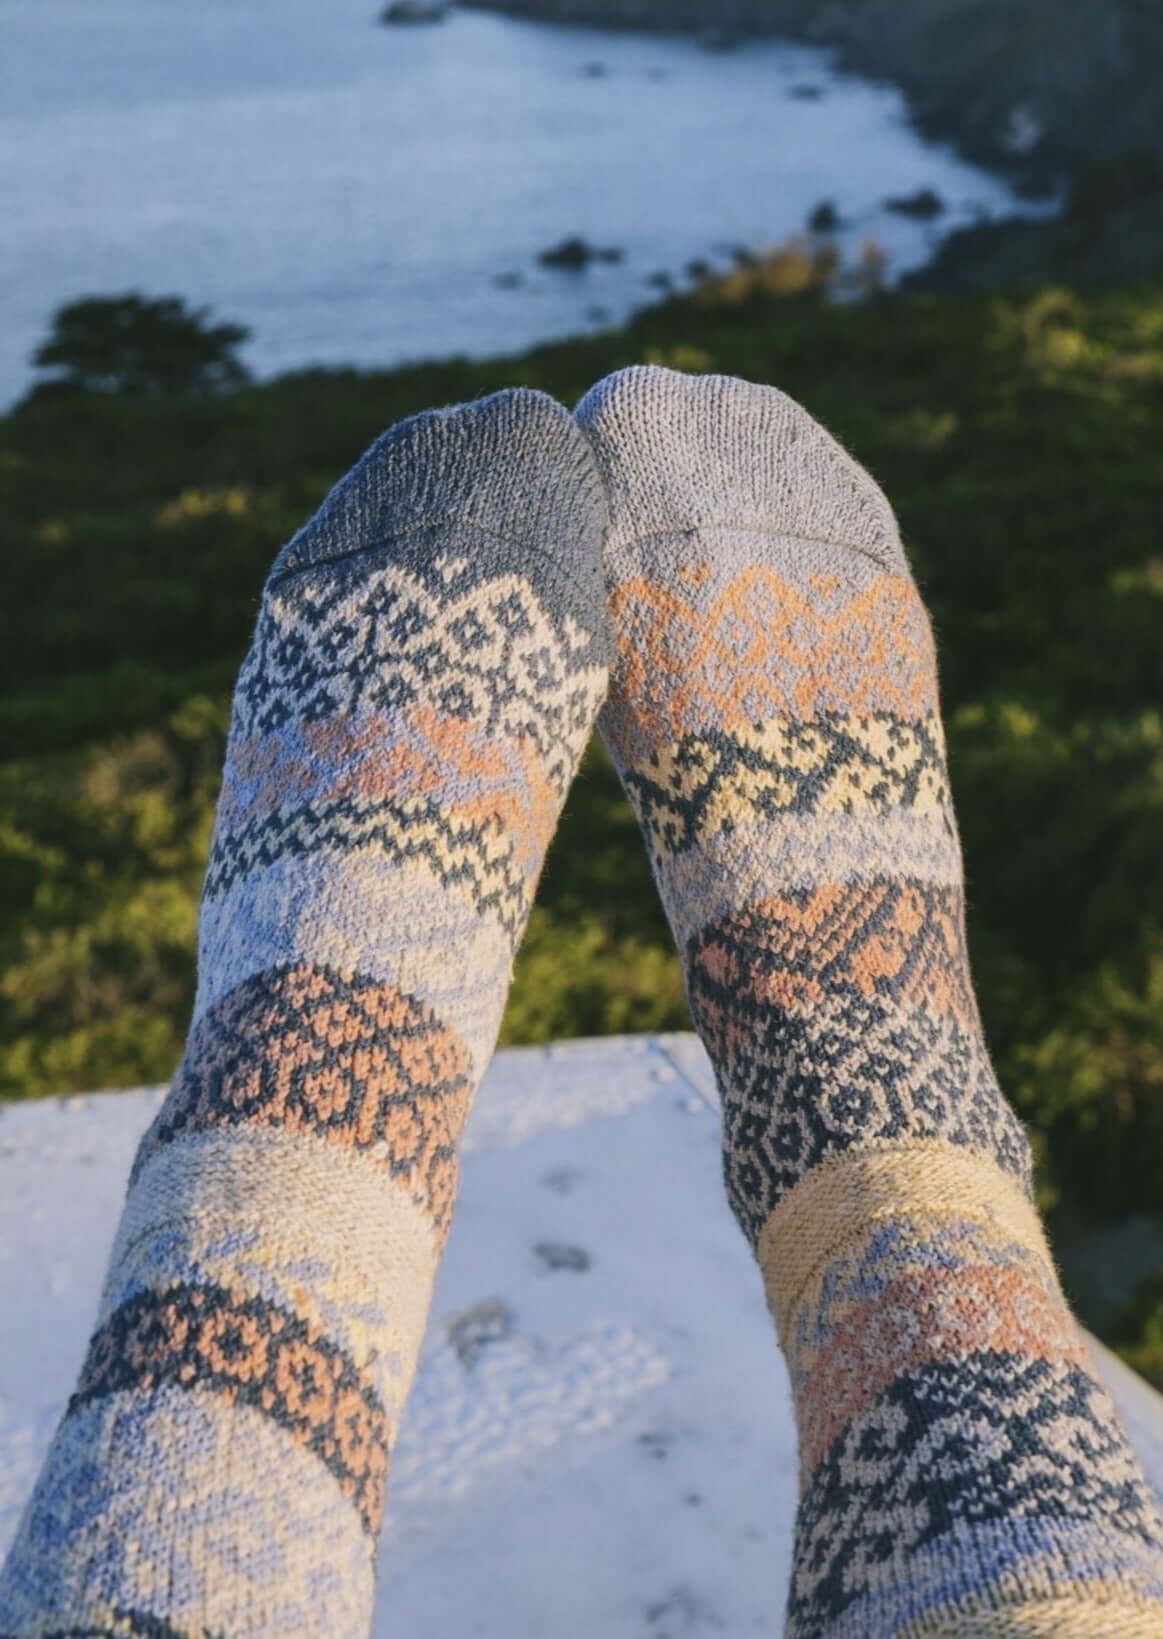 Solmate MIRAGE Knitted Crew Socks Proudly Made USA | These socks are delightfully mismatched & so very comfortable. Classy Cozy Cool Women's Boutique.